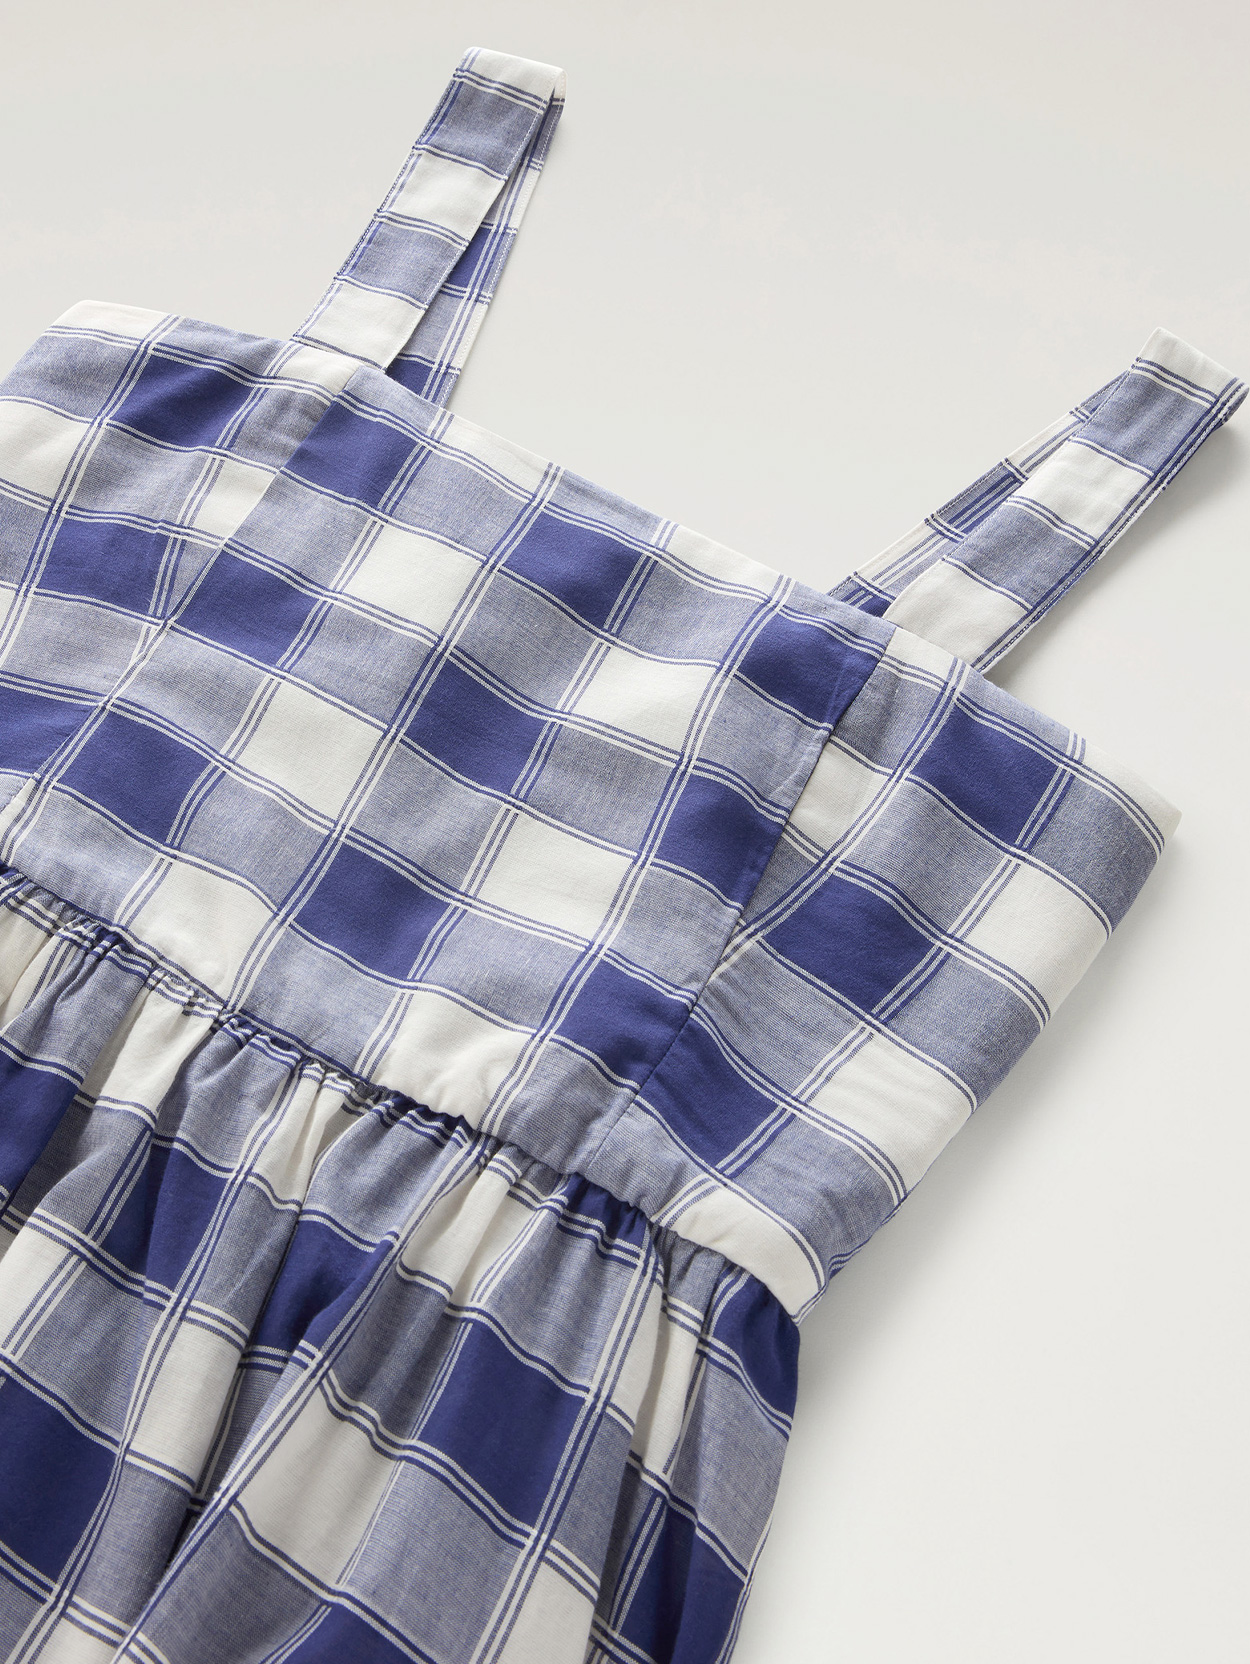 WOOLRICH CHECK VOILE DRESS